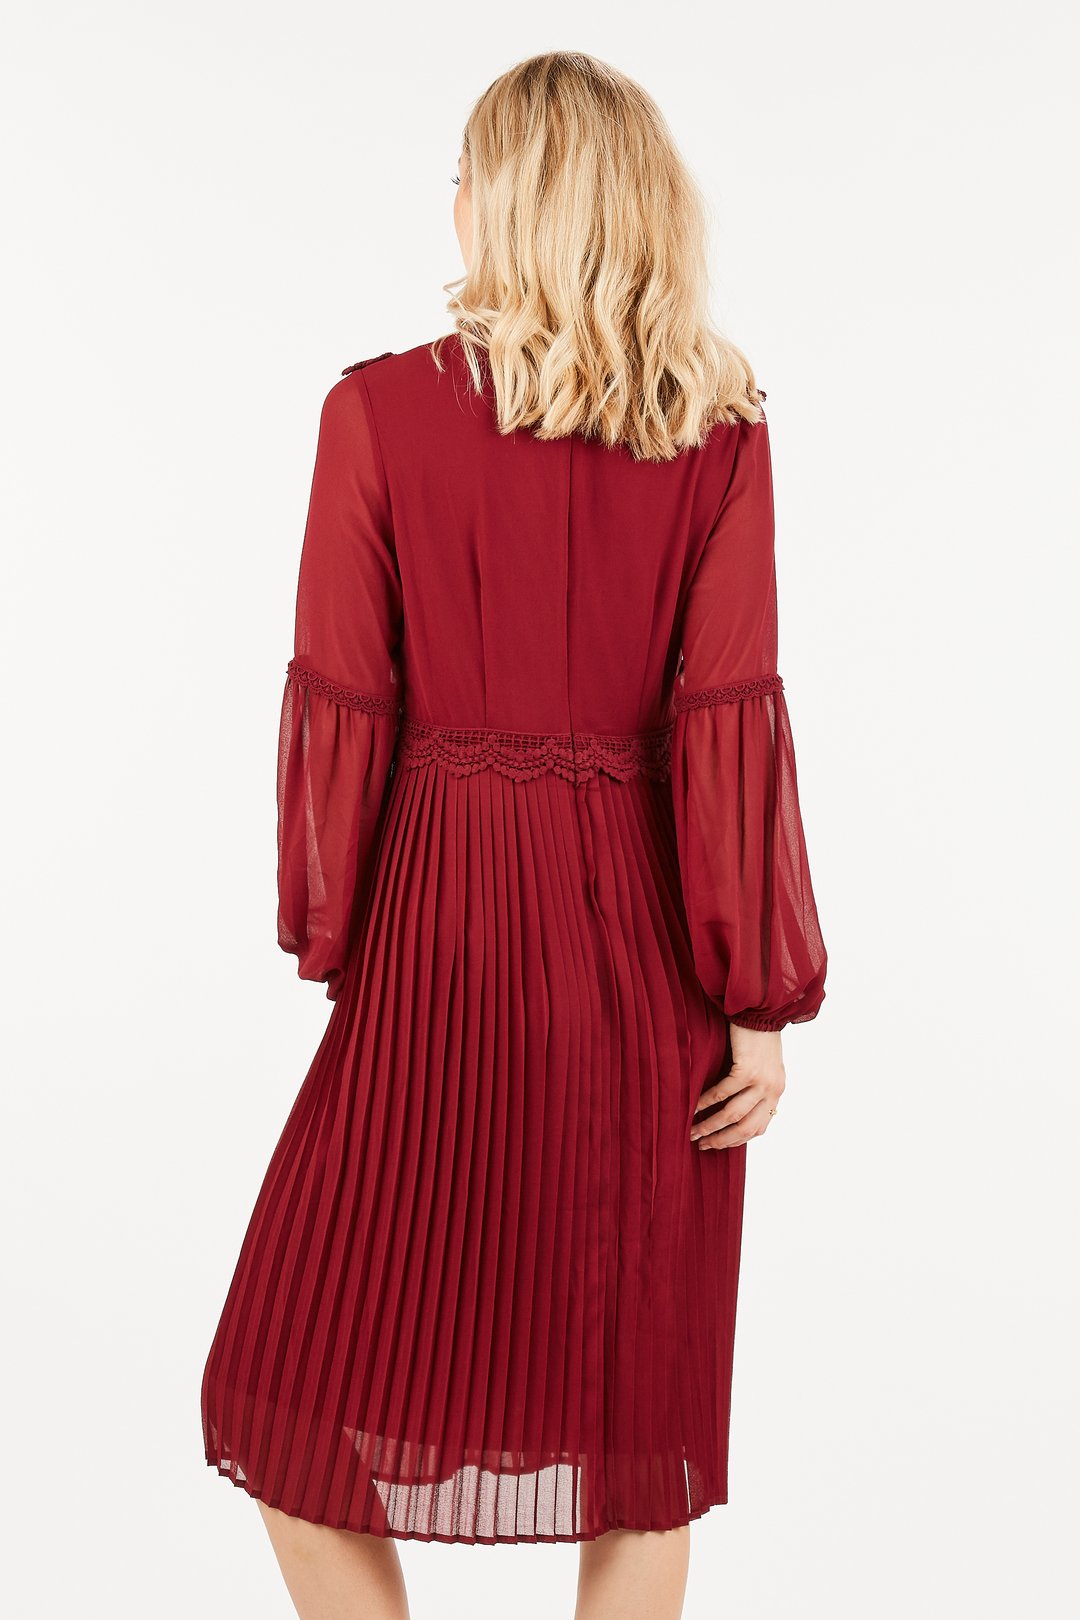 Ophelia Long Sleeve Casual Modest Dress back from A Closet Full of Dresses